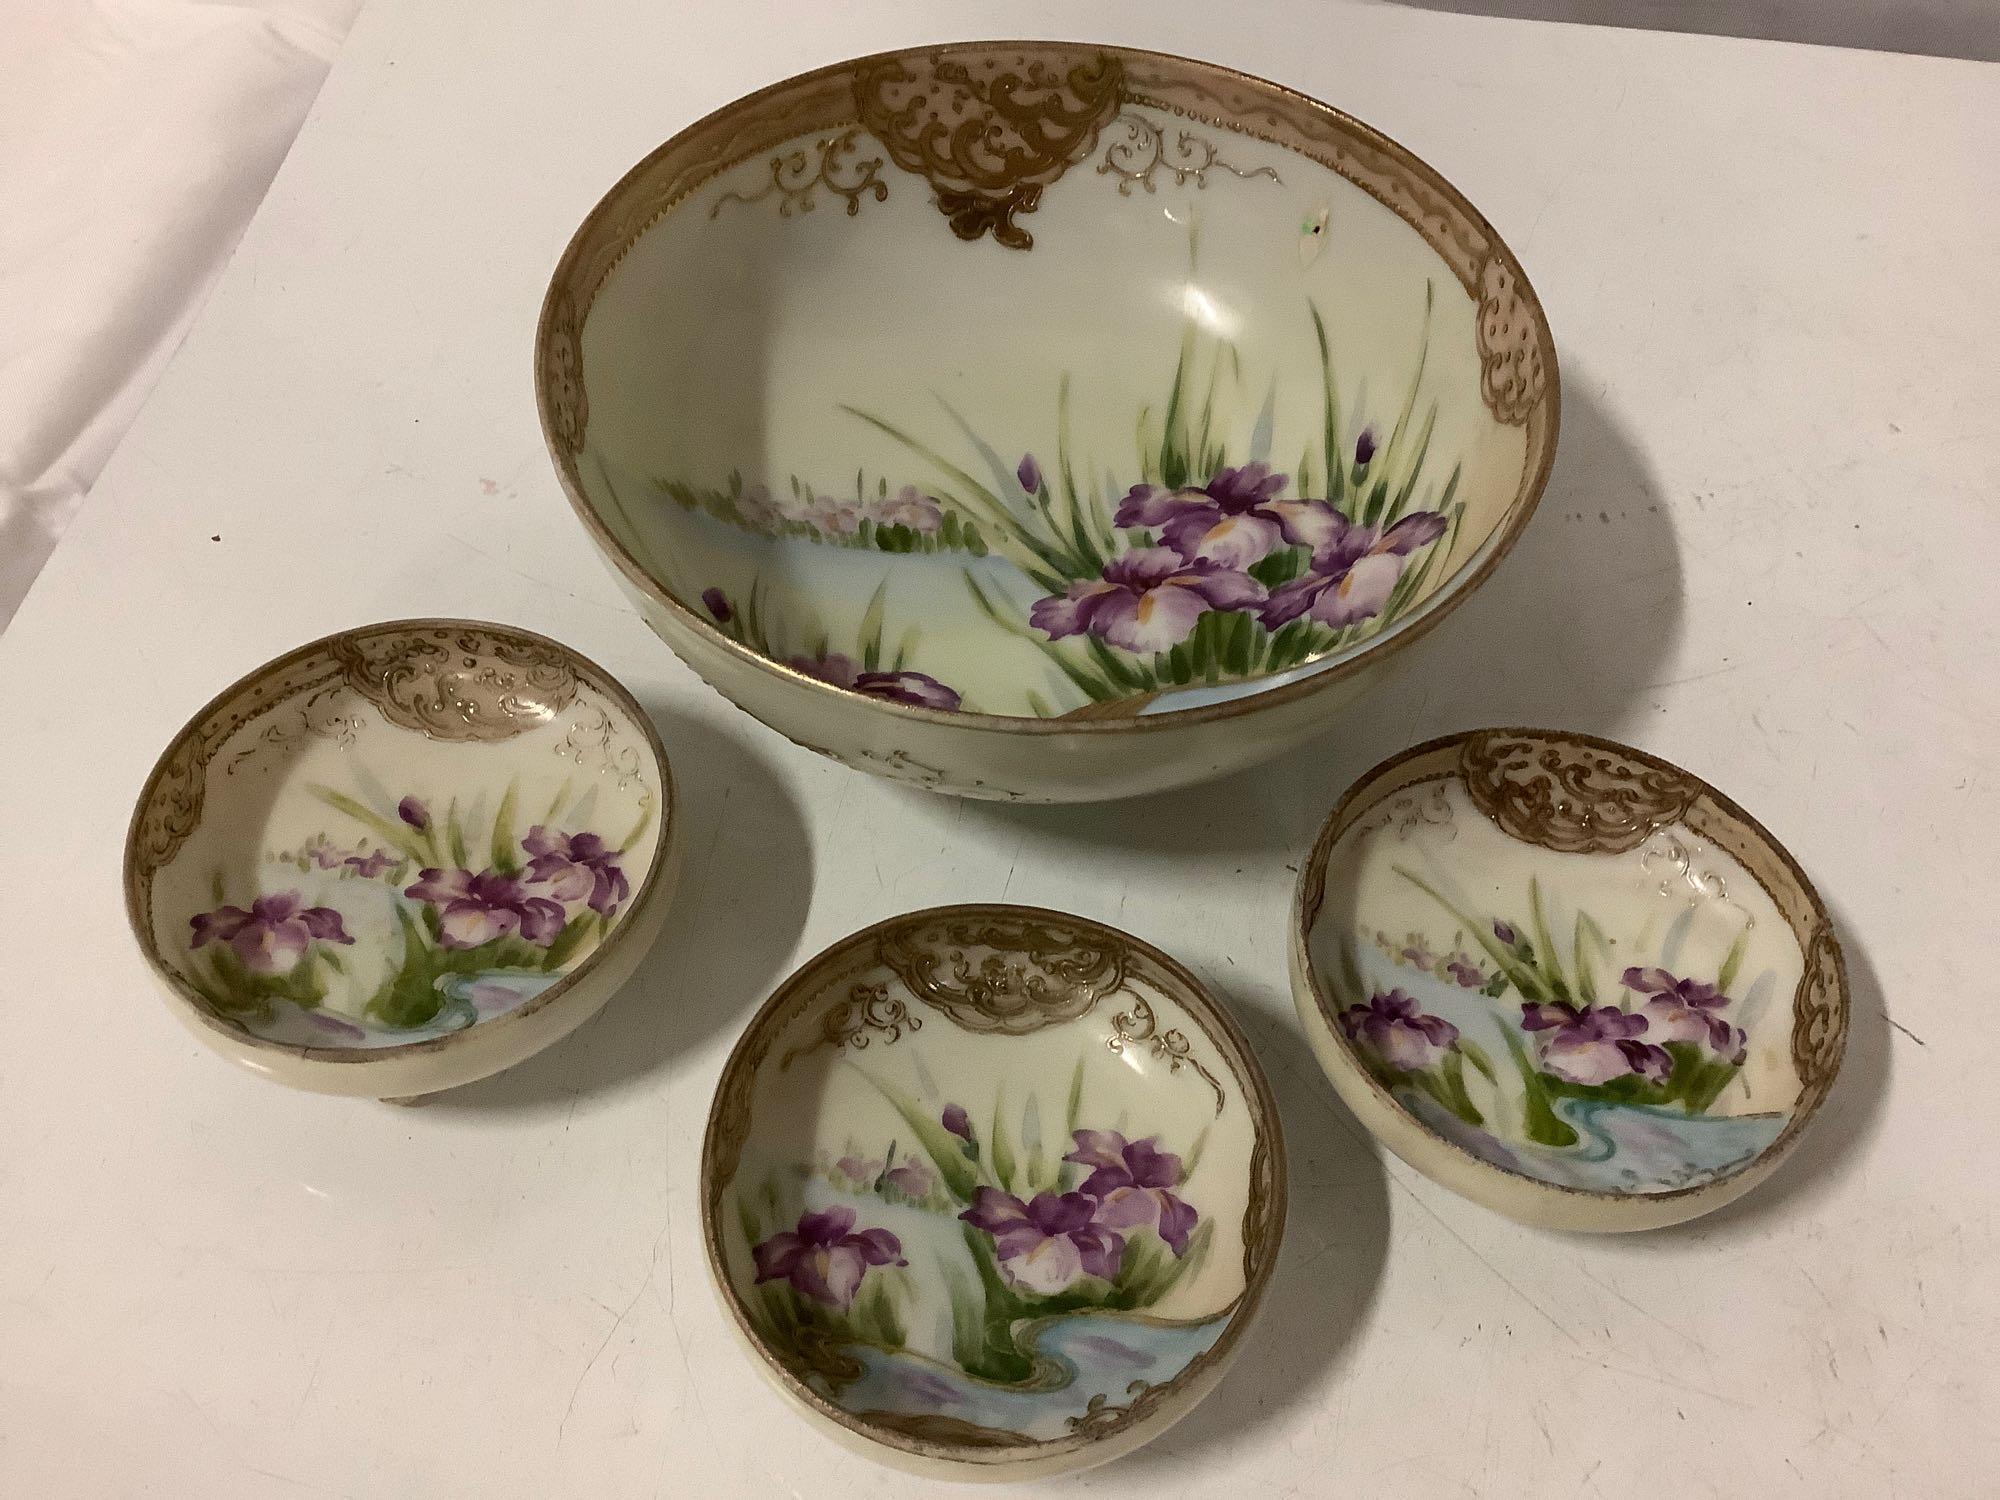 8 pc. lot of antique floral bowls / plate: Nippon hand painted bowls, Wood & Sons - England